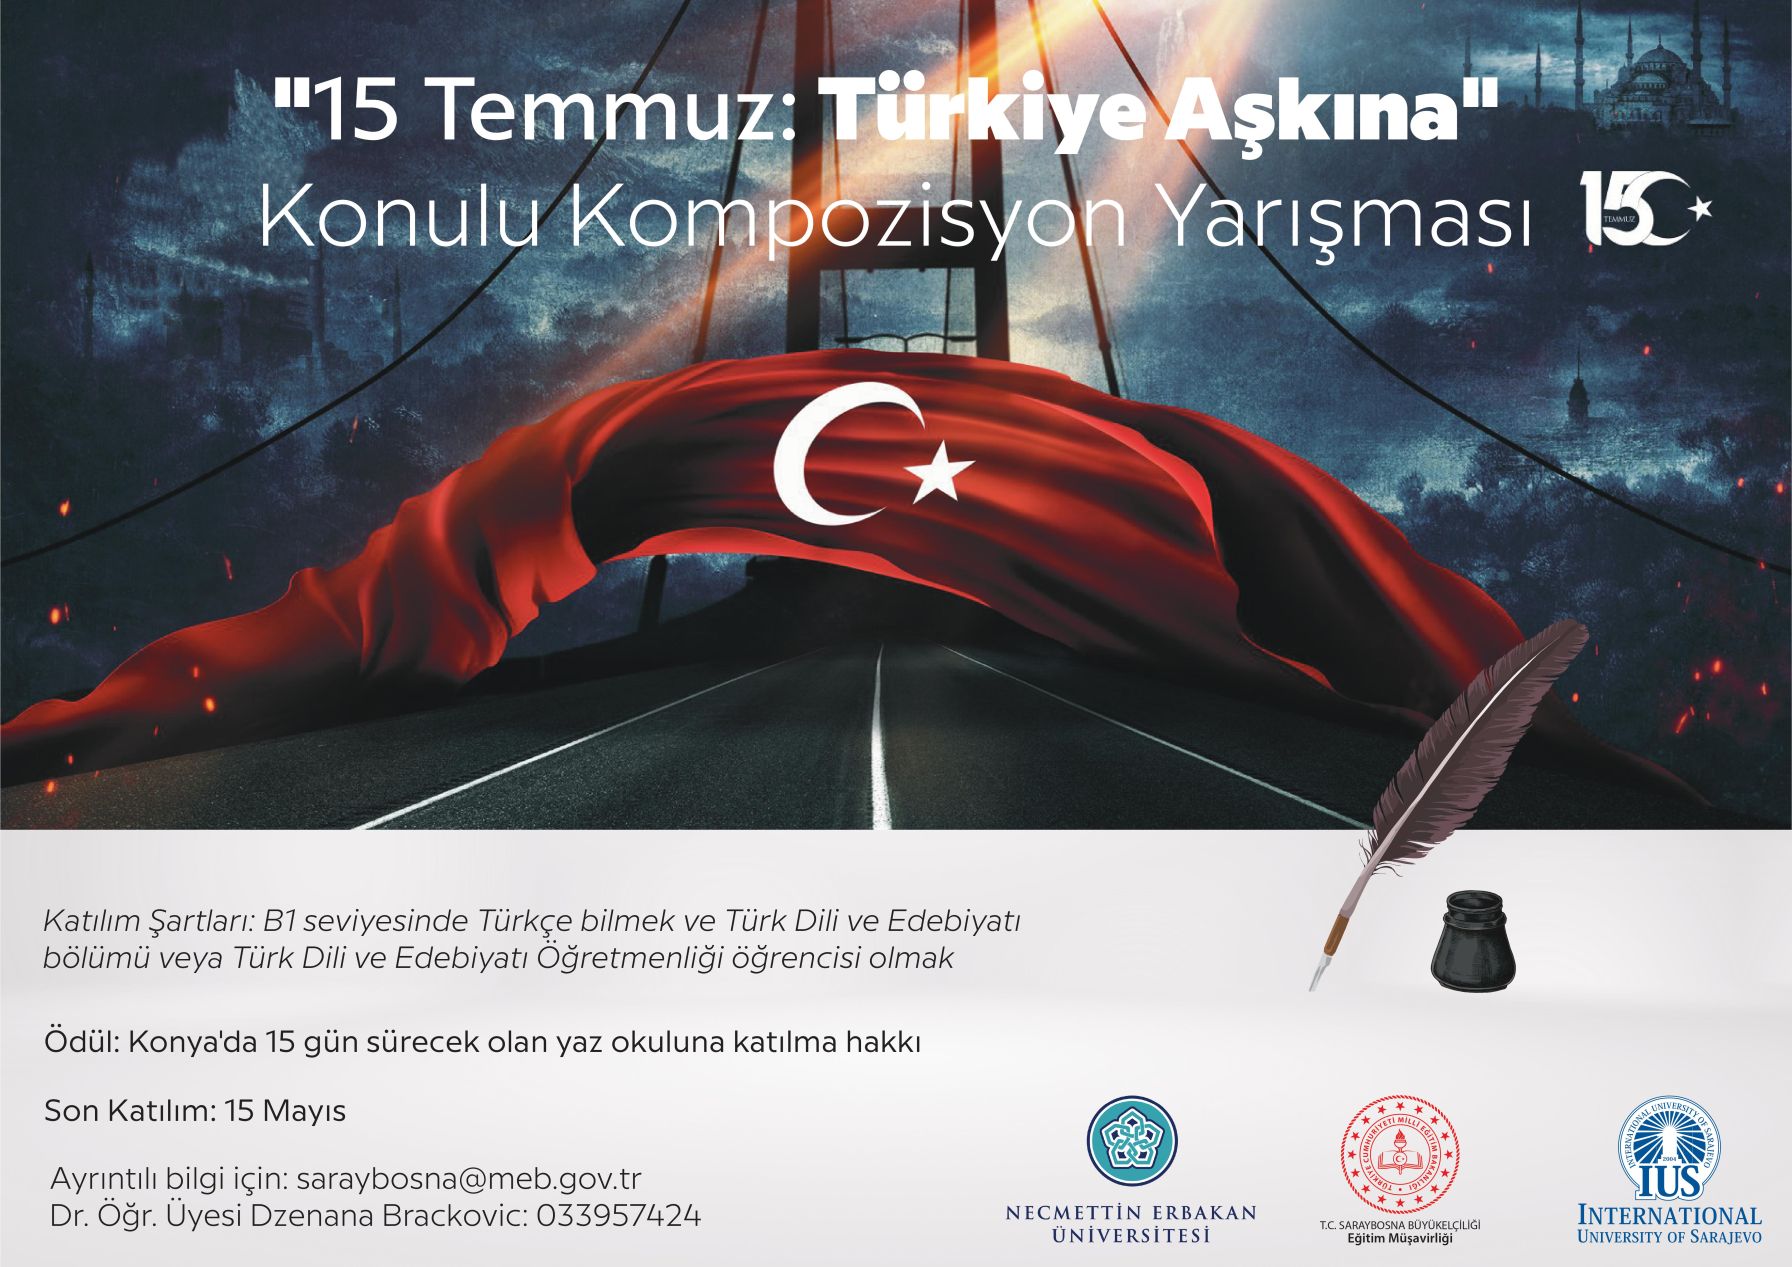 July 15: For the Love of Turkey - Essay Writing Competition